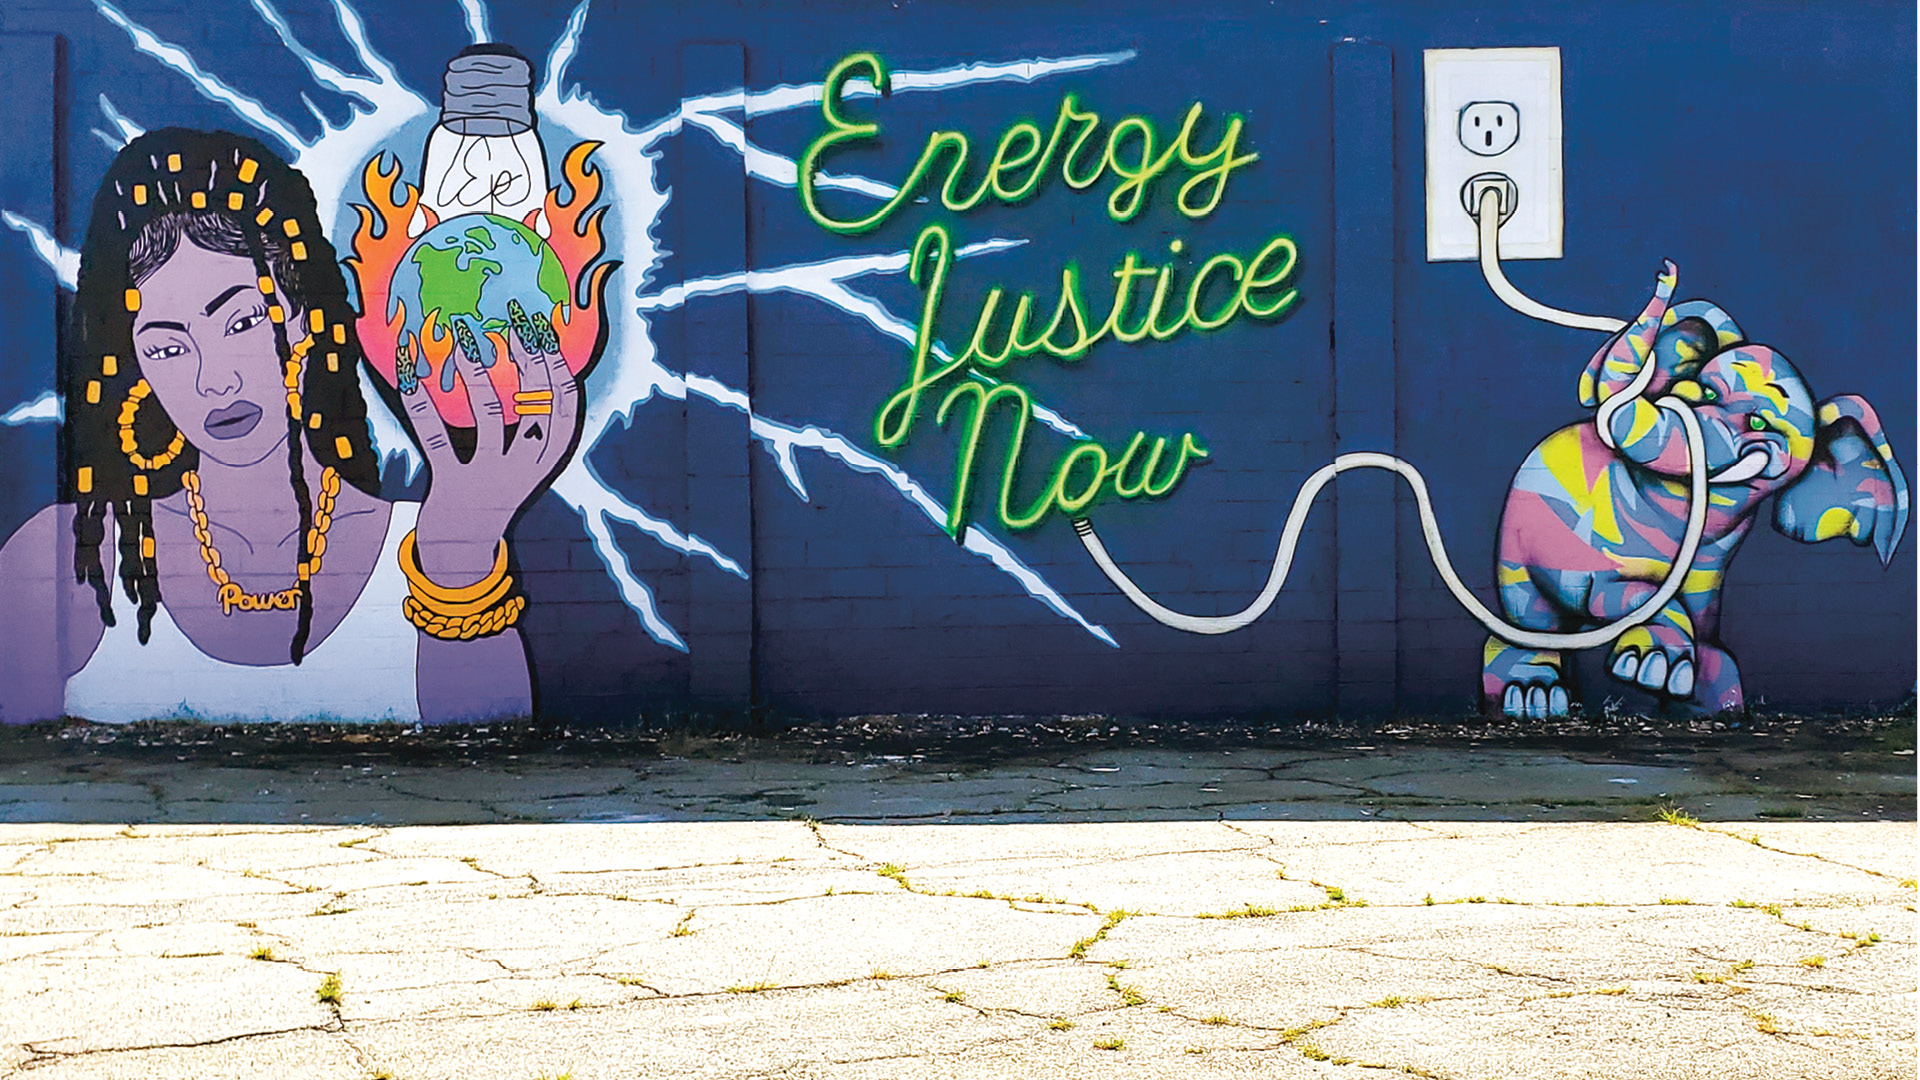 Energy Justice Now mural